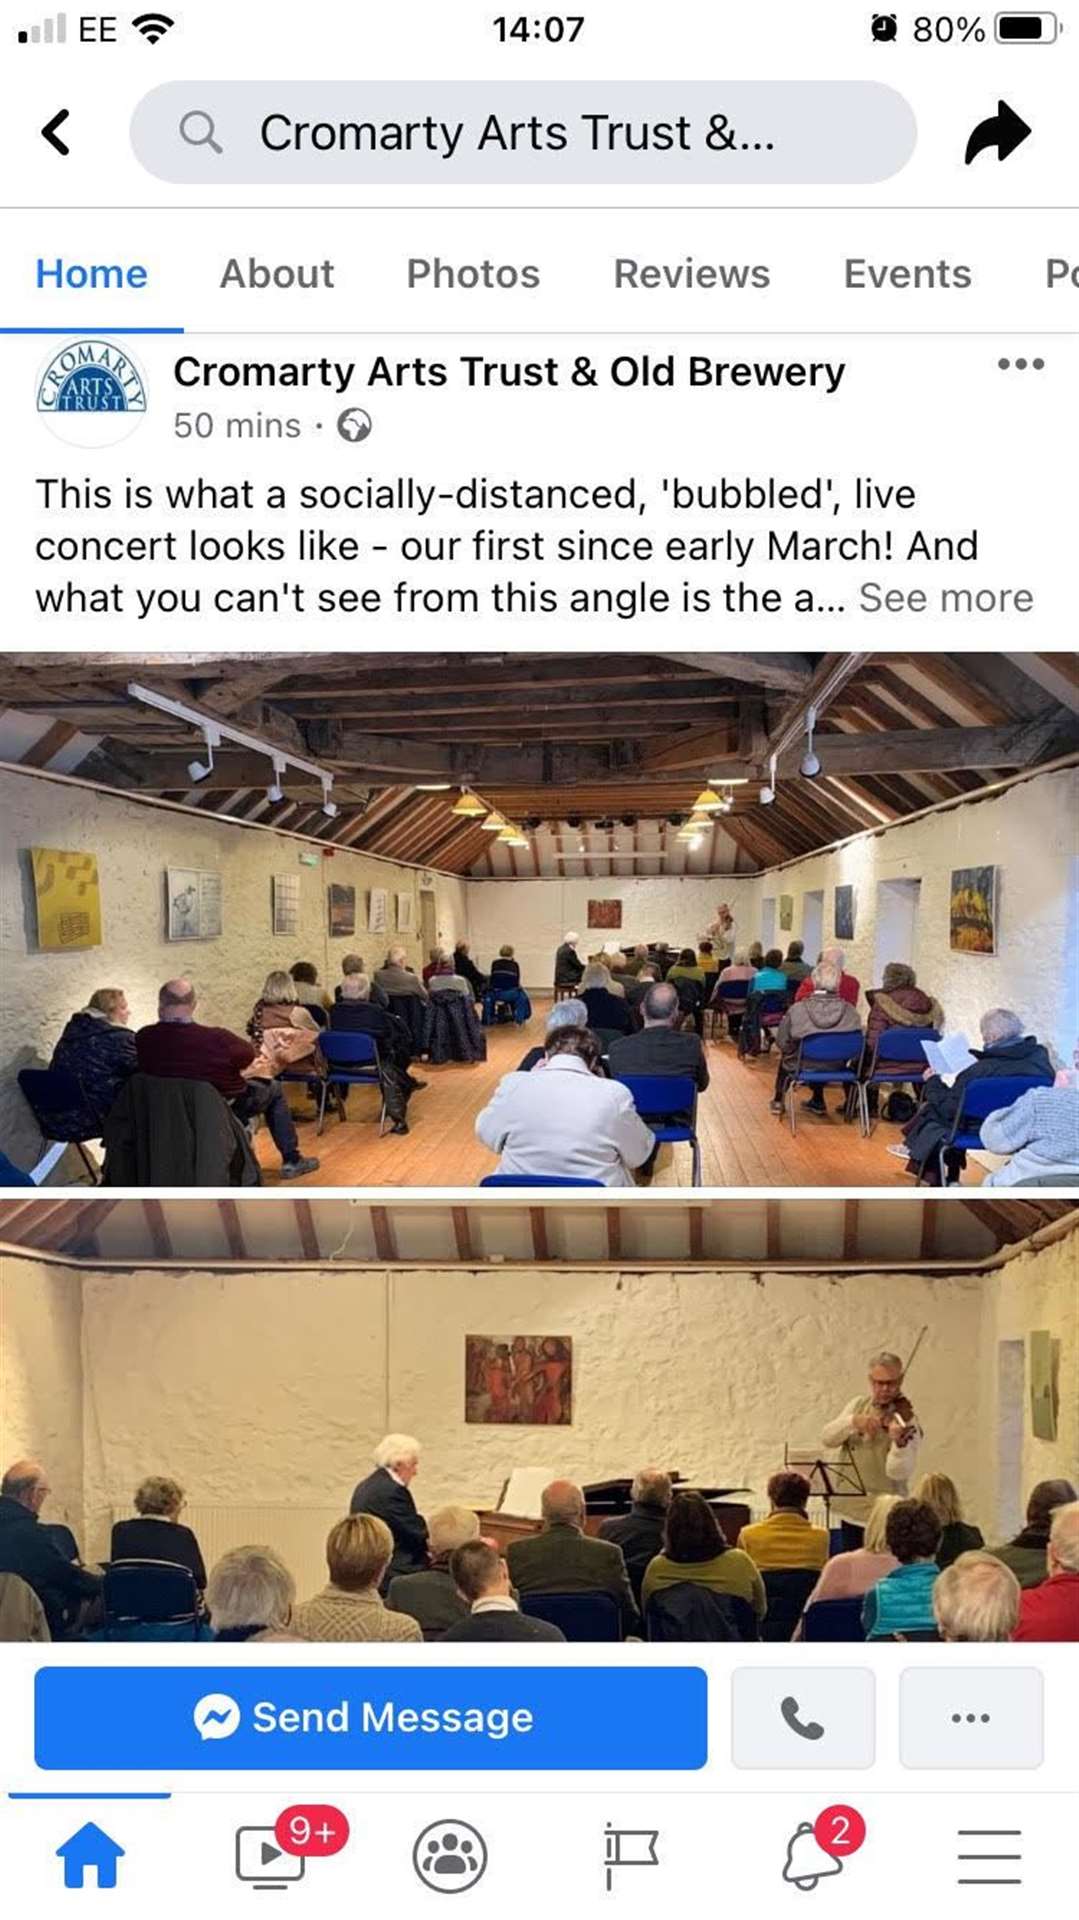 The Facebook post by Cromarty Arts Trust & Old Brewery.